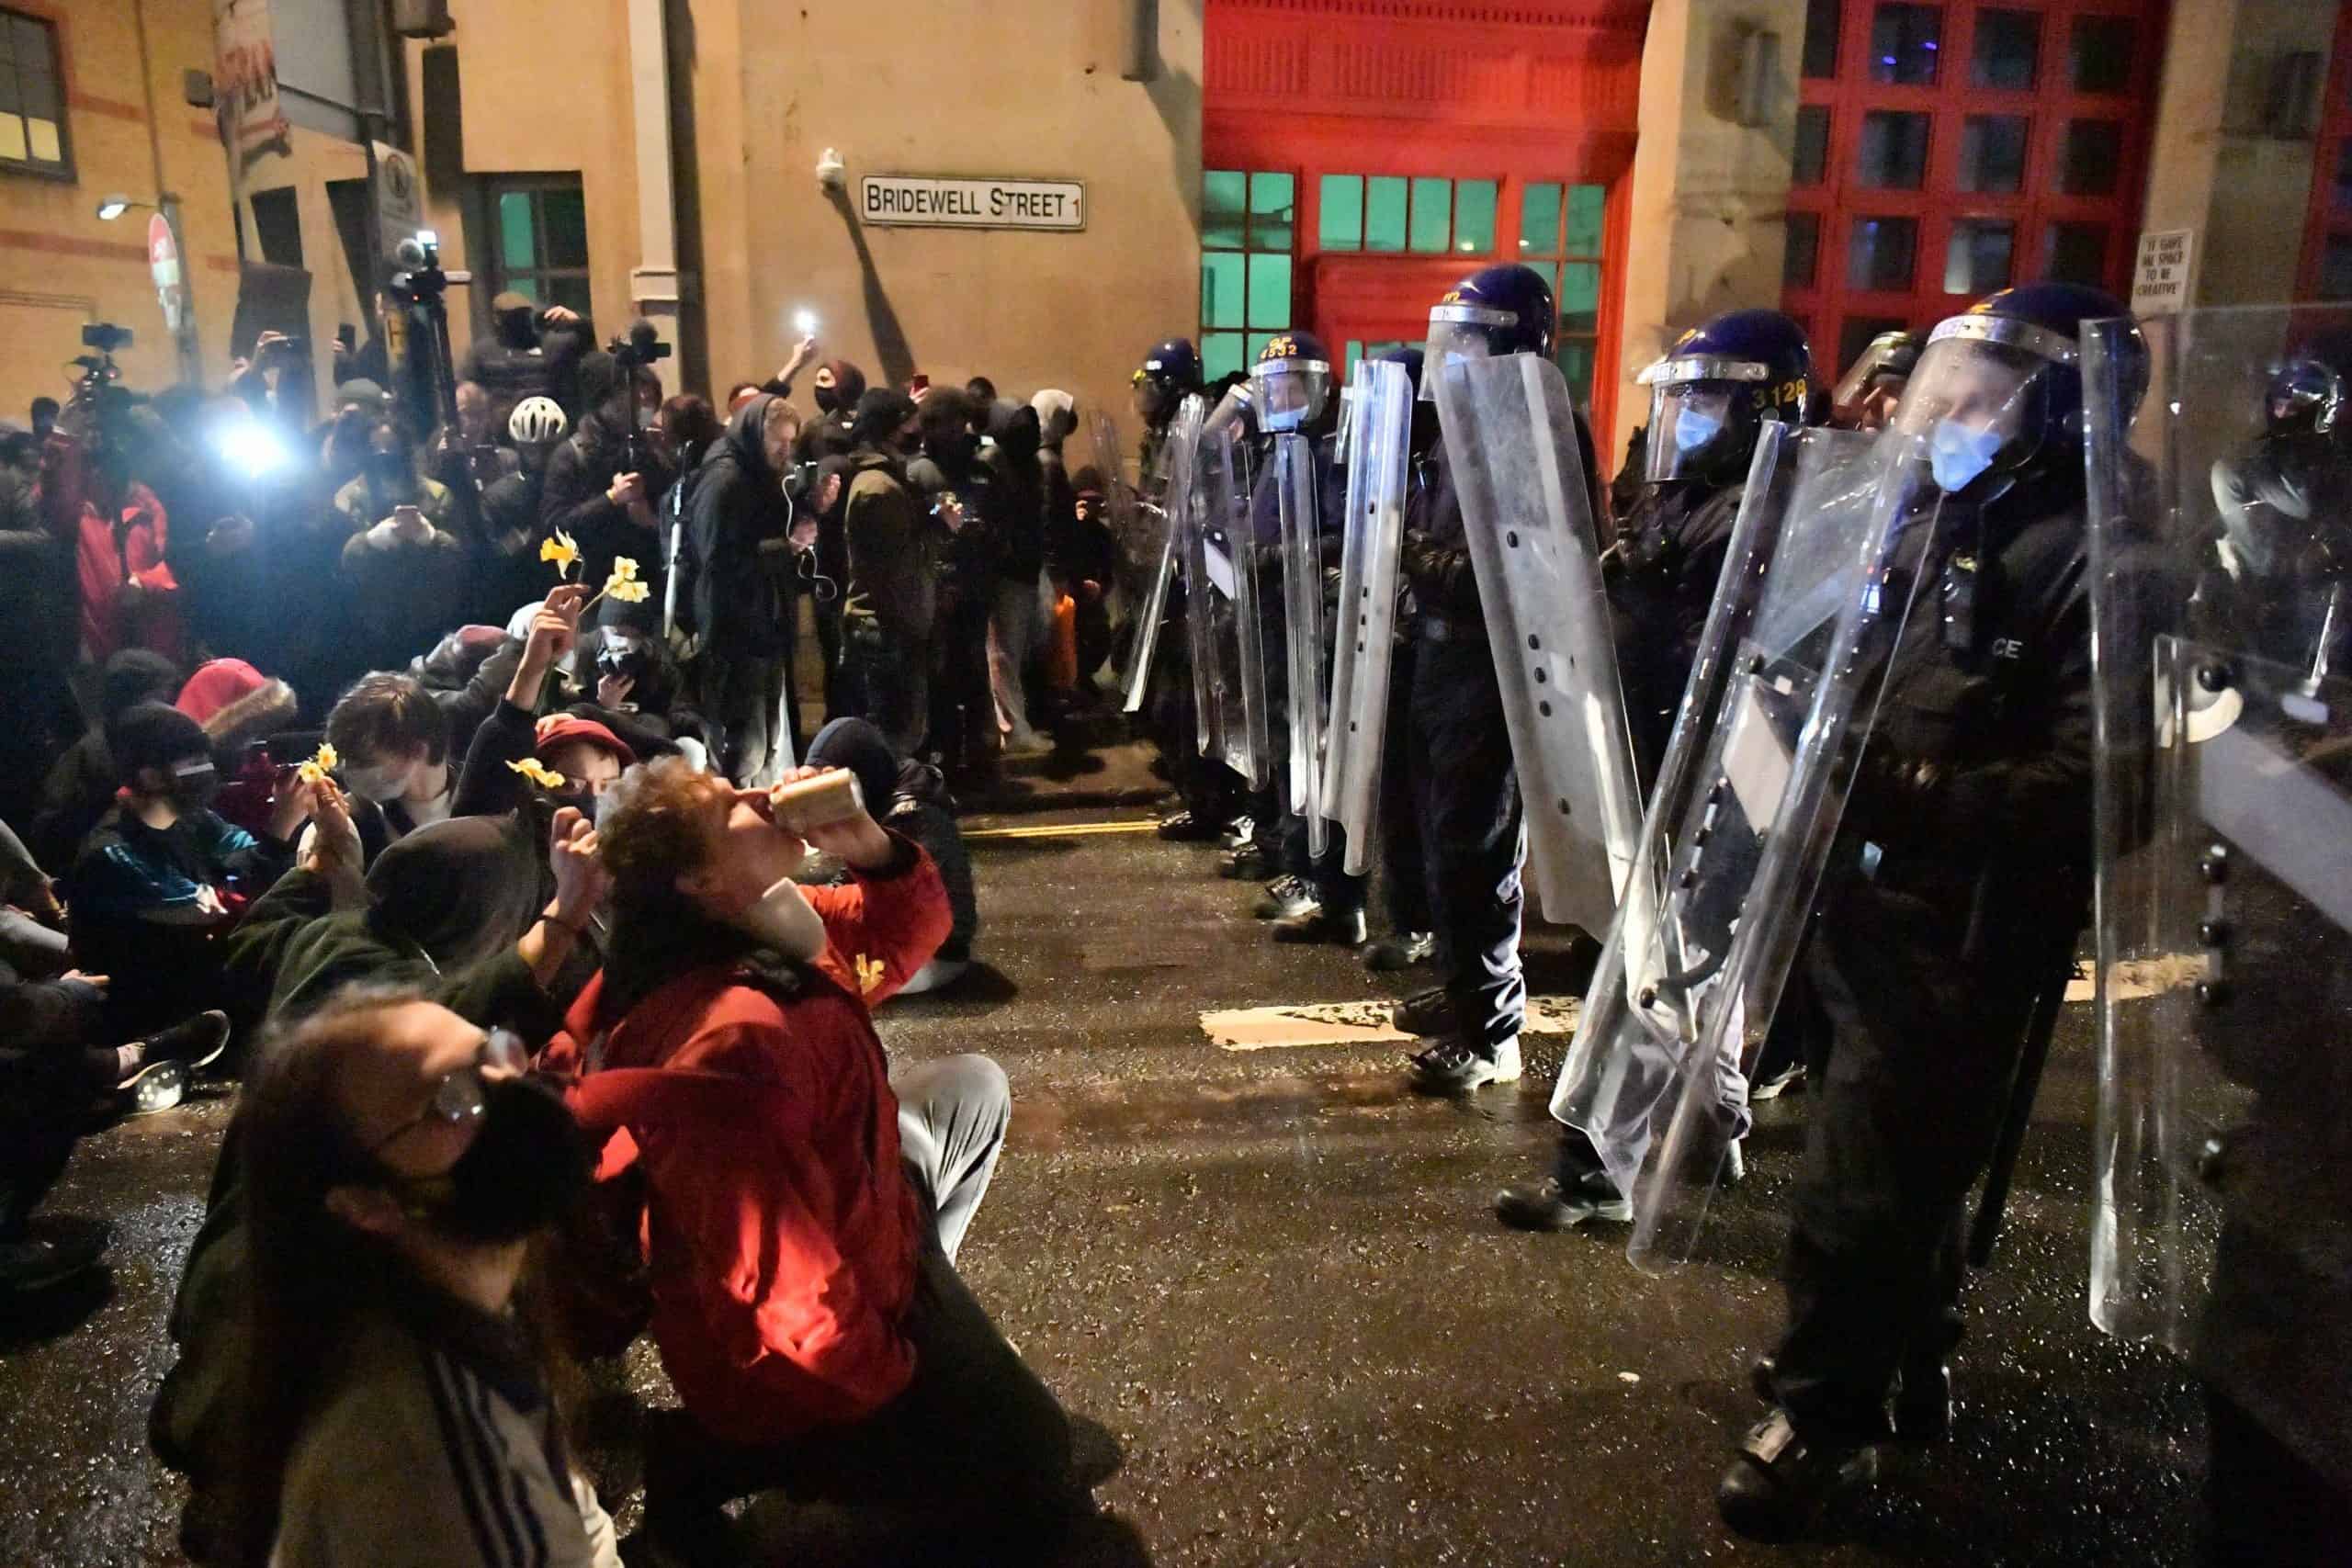 WATCH: Shocking footage from Bristol shows police aggression towards protestors